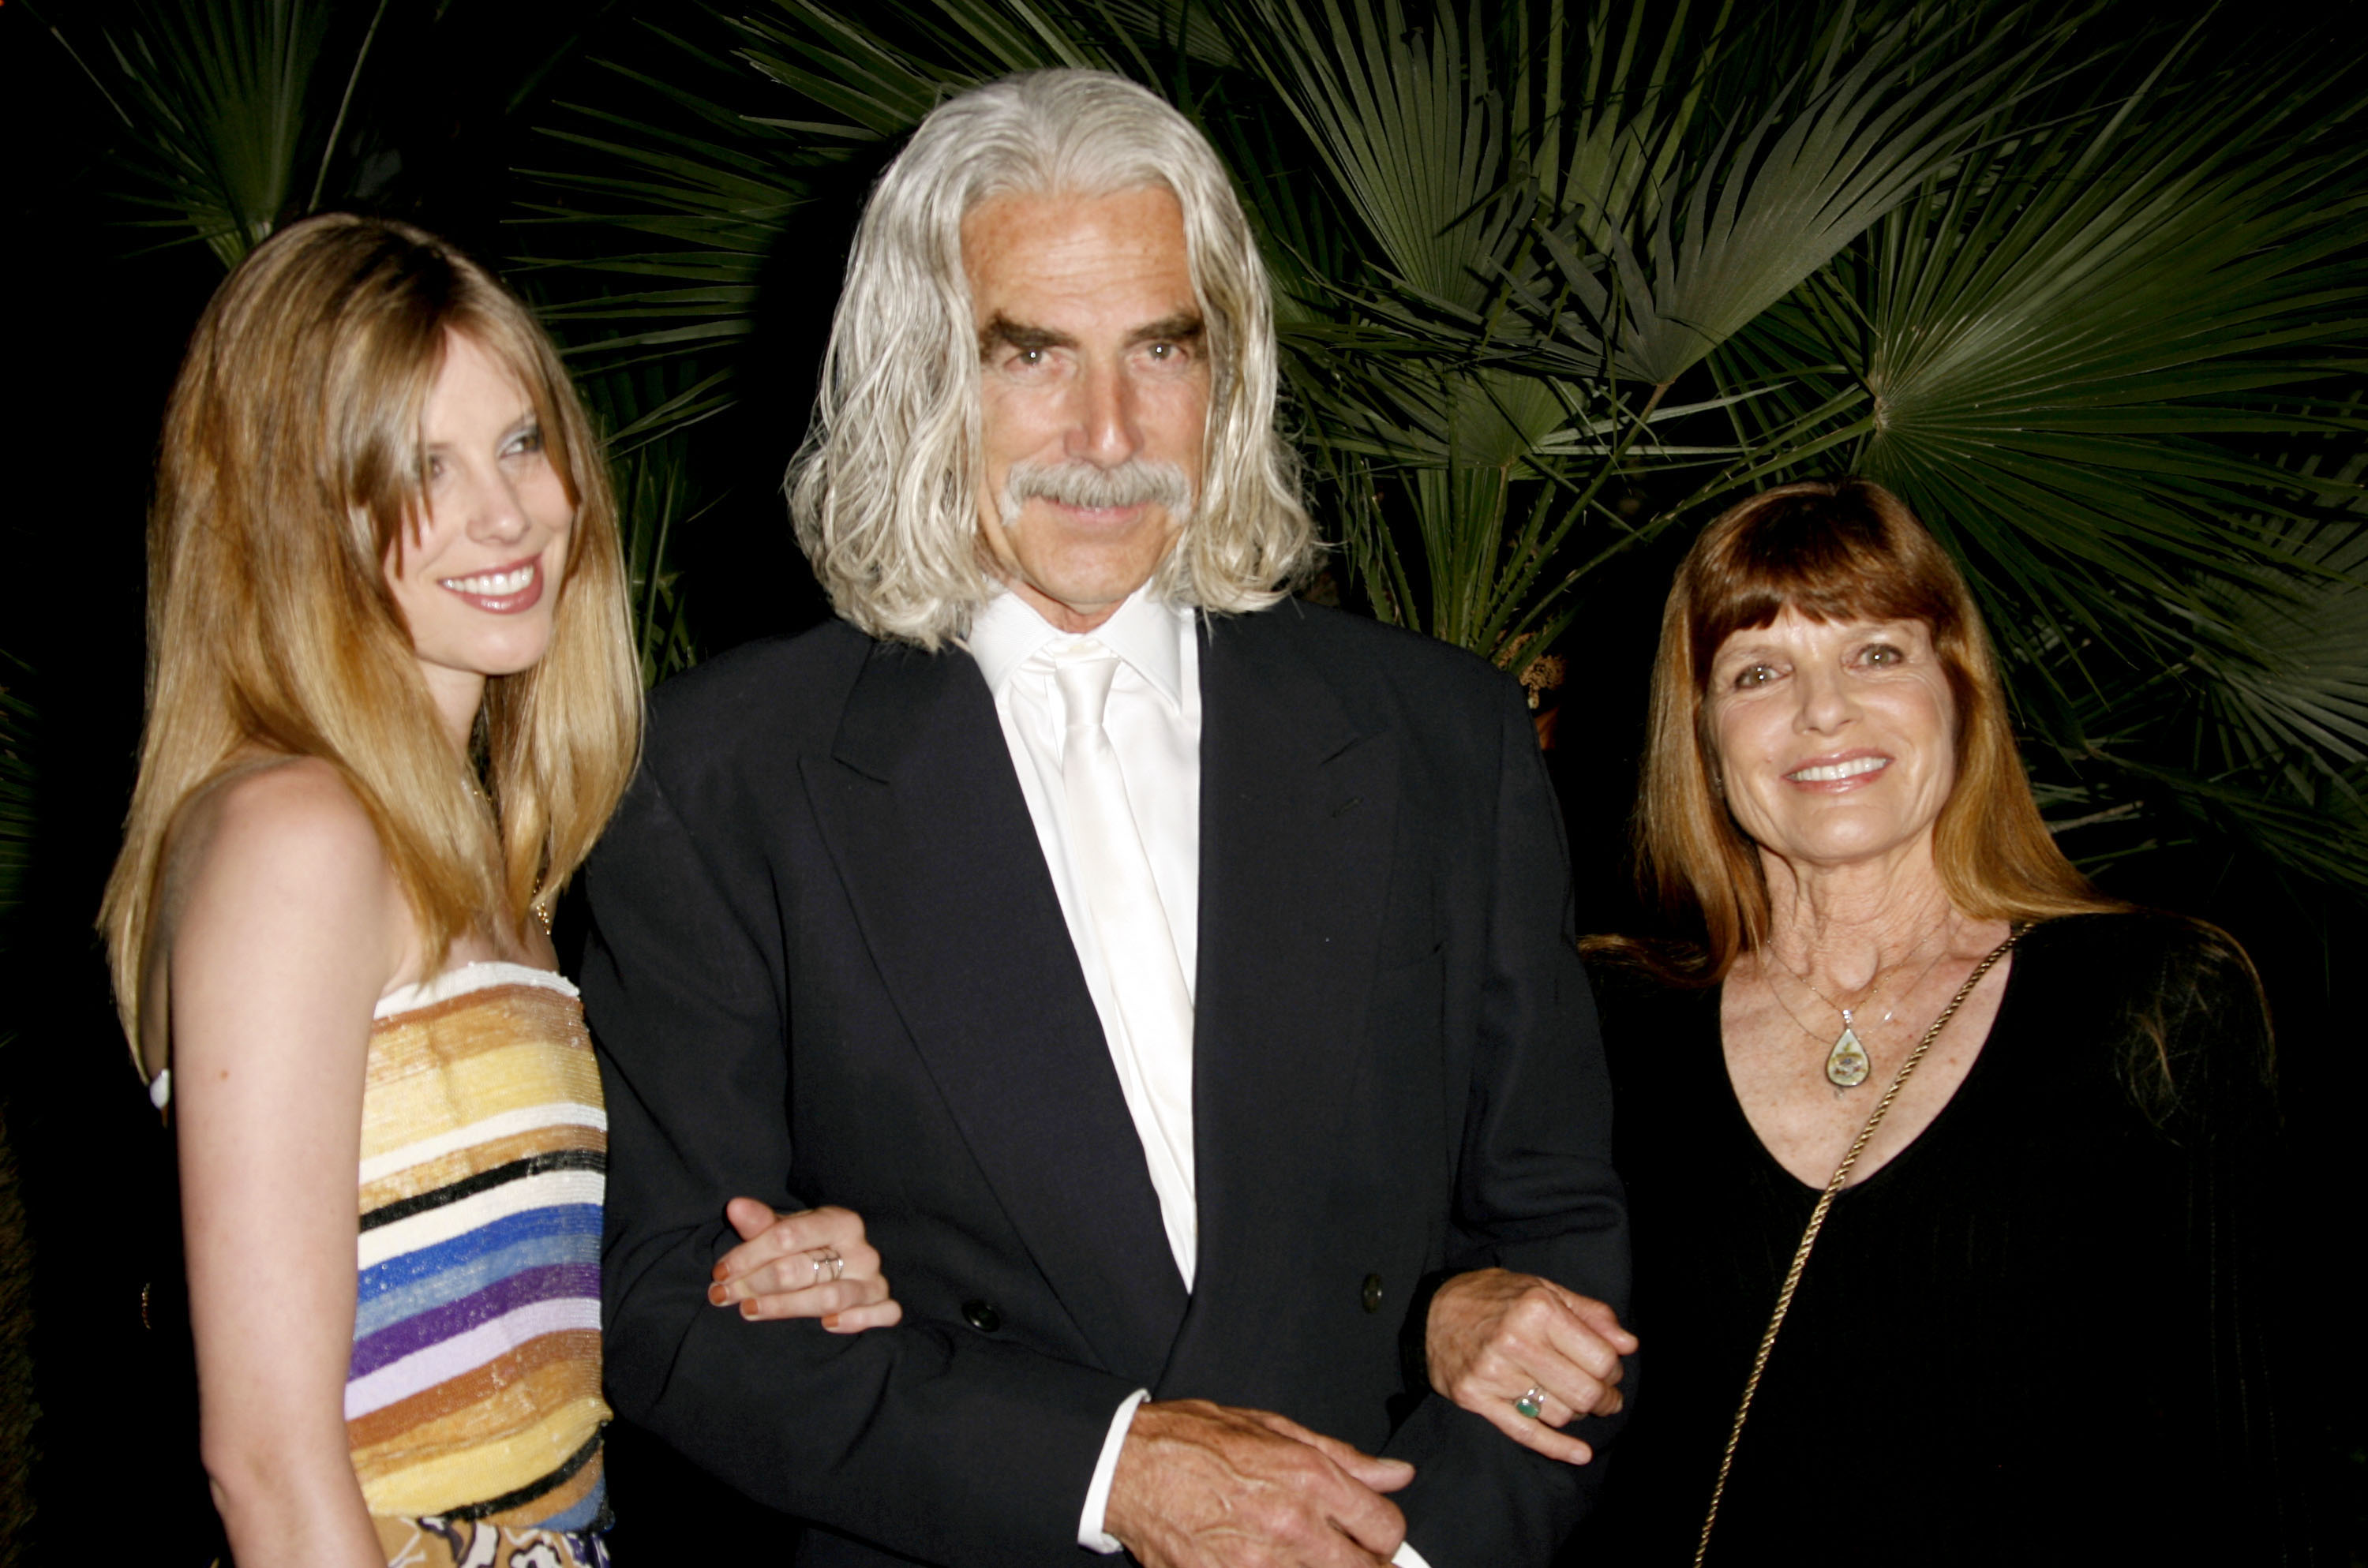 Cleo Rose Elliott, Sam Elliot, and Katherine Ross at the Cannes Film Festival - New Line 40th Anniversary "Golden Compass" Party in Cannes, France, on May 23, 2007 | Source: Getty Images